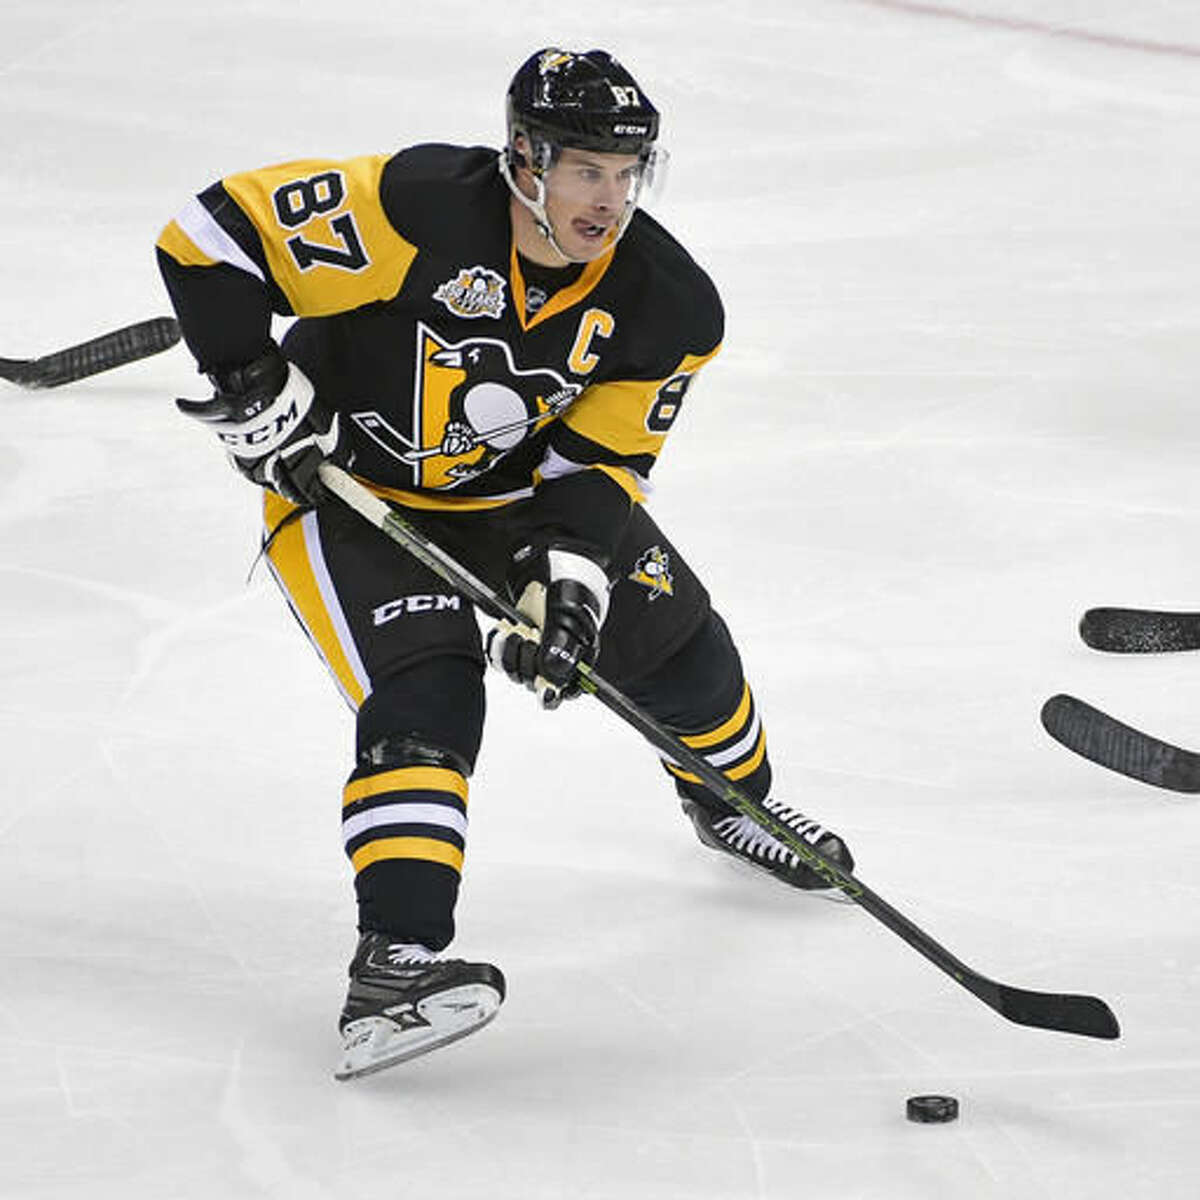 FILE - In this Oct. 27, 2016, file photo, Pittsburgh Penguins center Sidney Crosby (87) skates with the puck during an NHL hockey game against the New York Islanders on Thursday, Oct. 27, 2016, in Pittsburgh. Connor McDavid grew up idolizing Sidney Crosby. Now the Edmonton Oilers young star gets a chance to face Crosby in the NHL for the first time on Tuesday. Nov. 8, 2016 when the Oilers visit the Pittsburgh Penguins. (AP Photo/Fred Vuich, File)